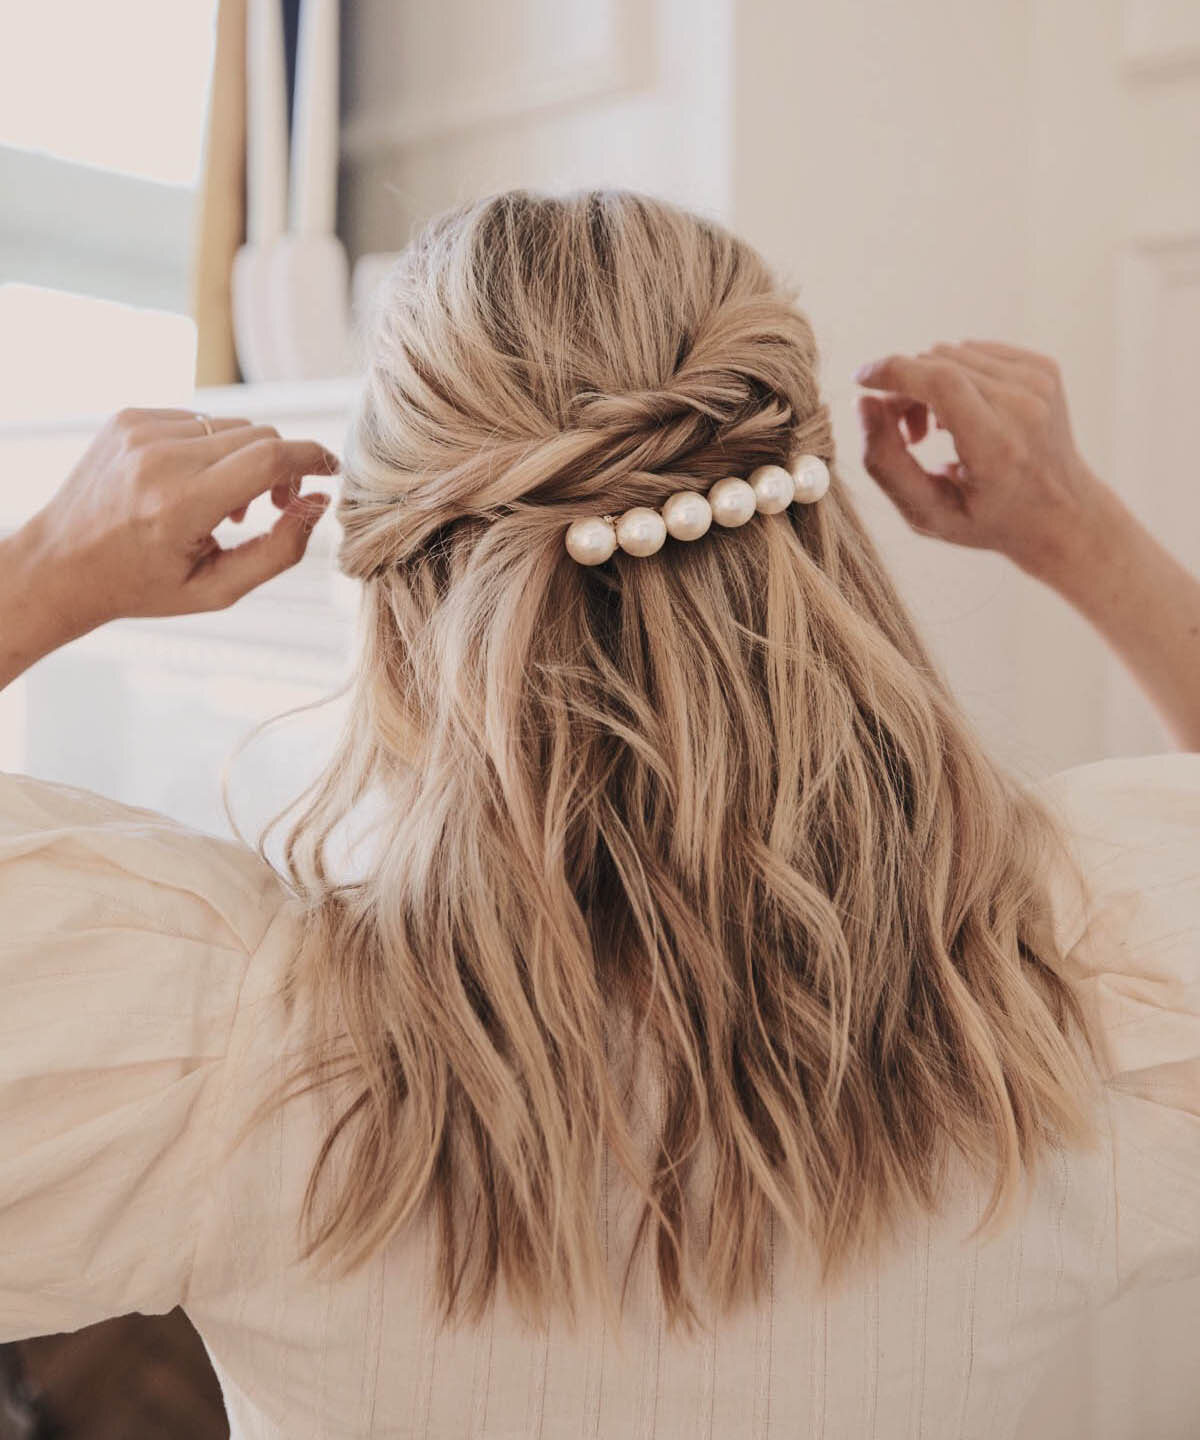 5 HALF-UP HALF-DOWN HAIRSTYLES YOU NEED TO TRY